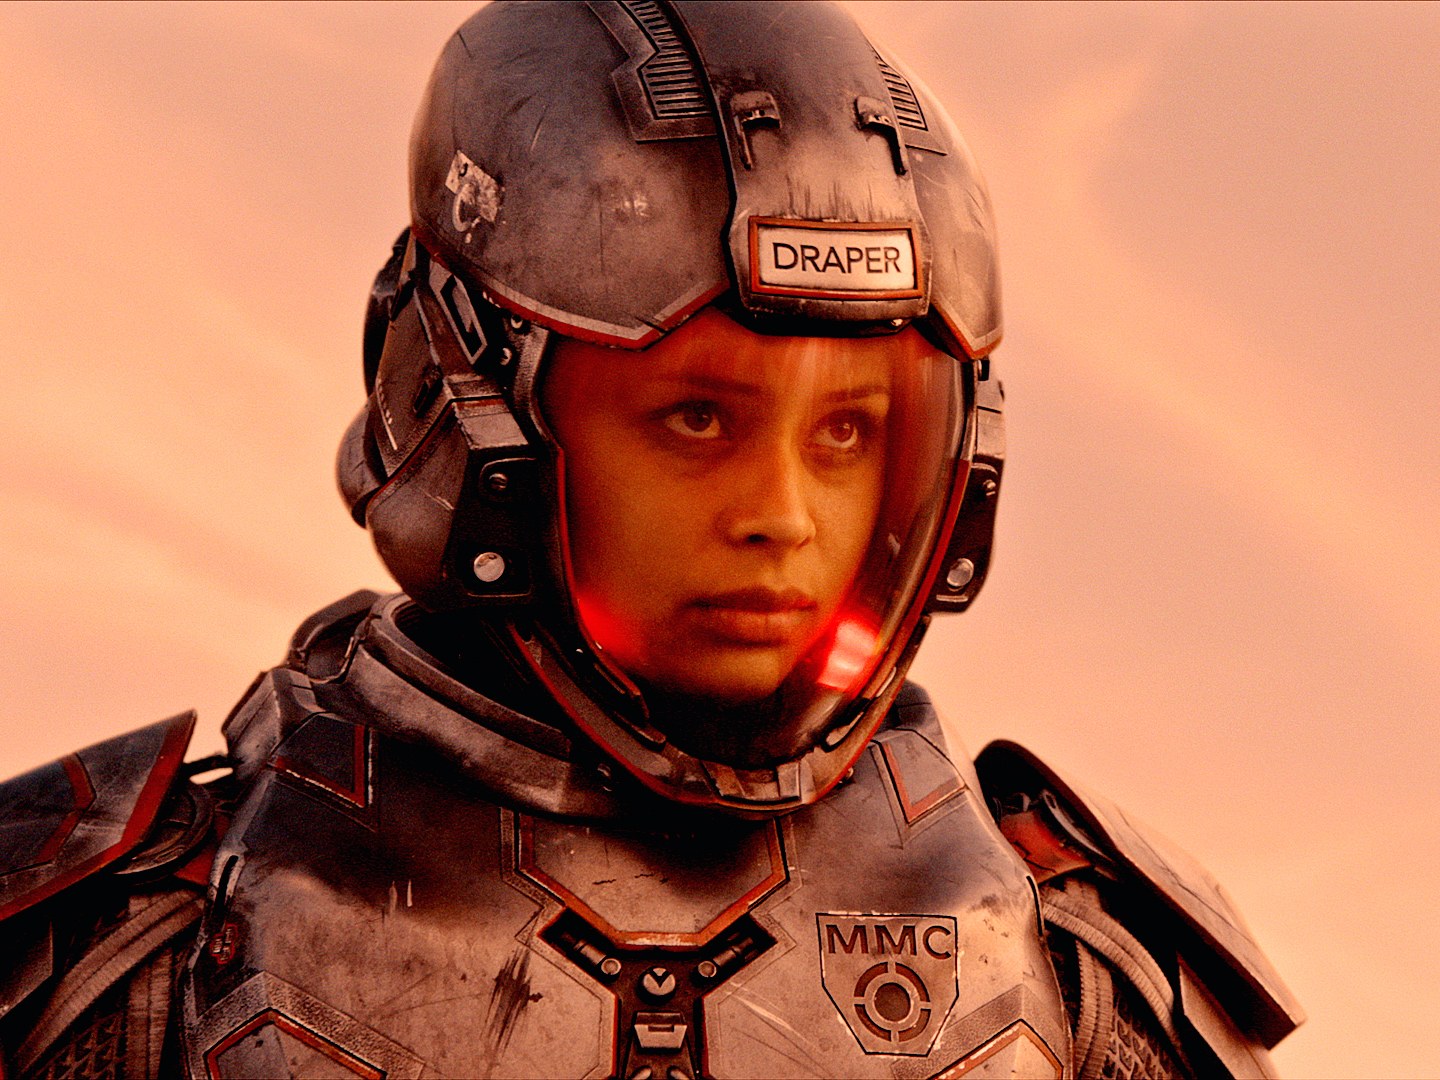 The Image shows the a woman in spacesuit, behind her is a slightly red sky